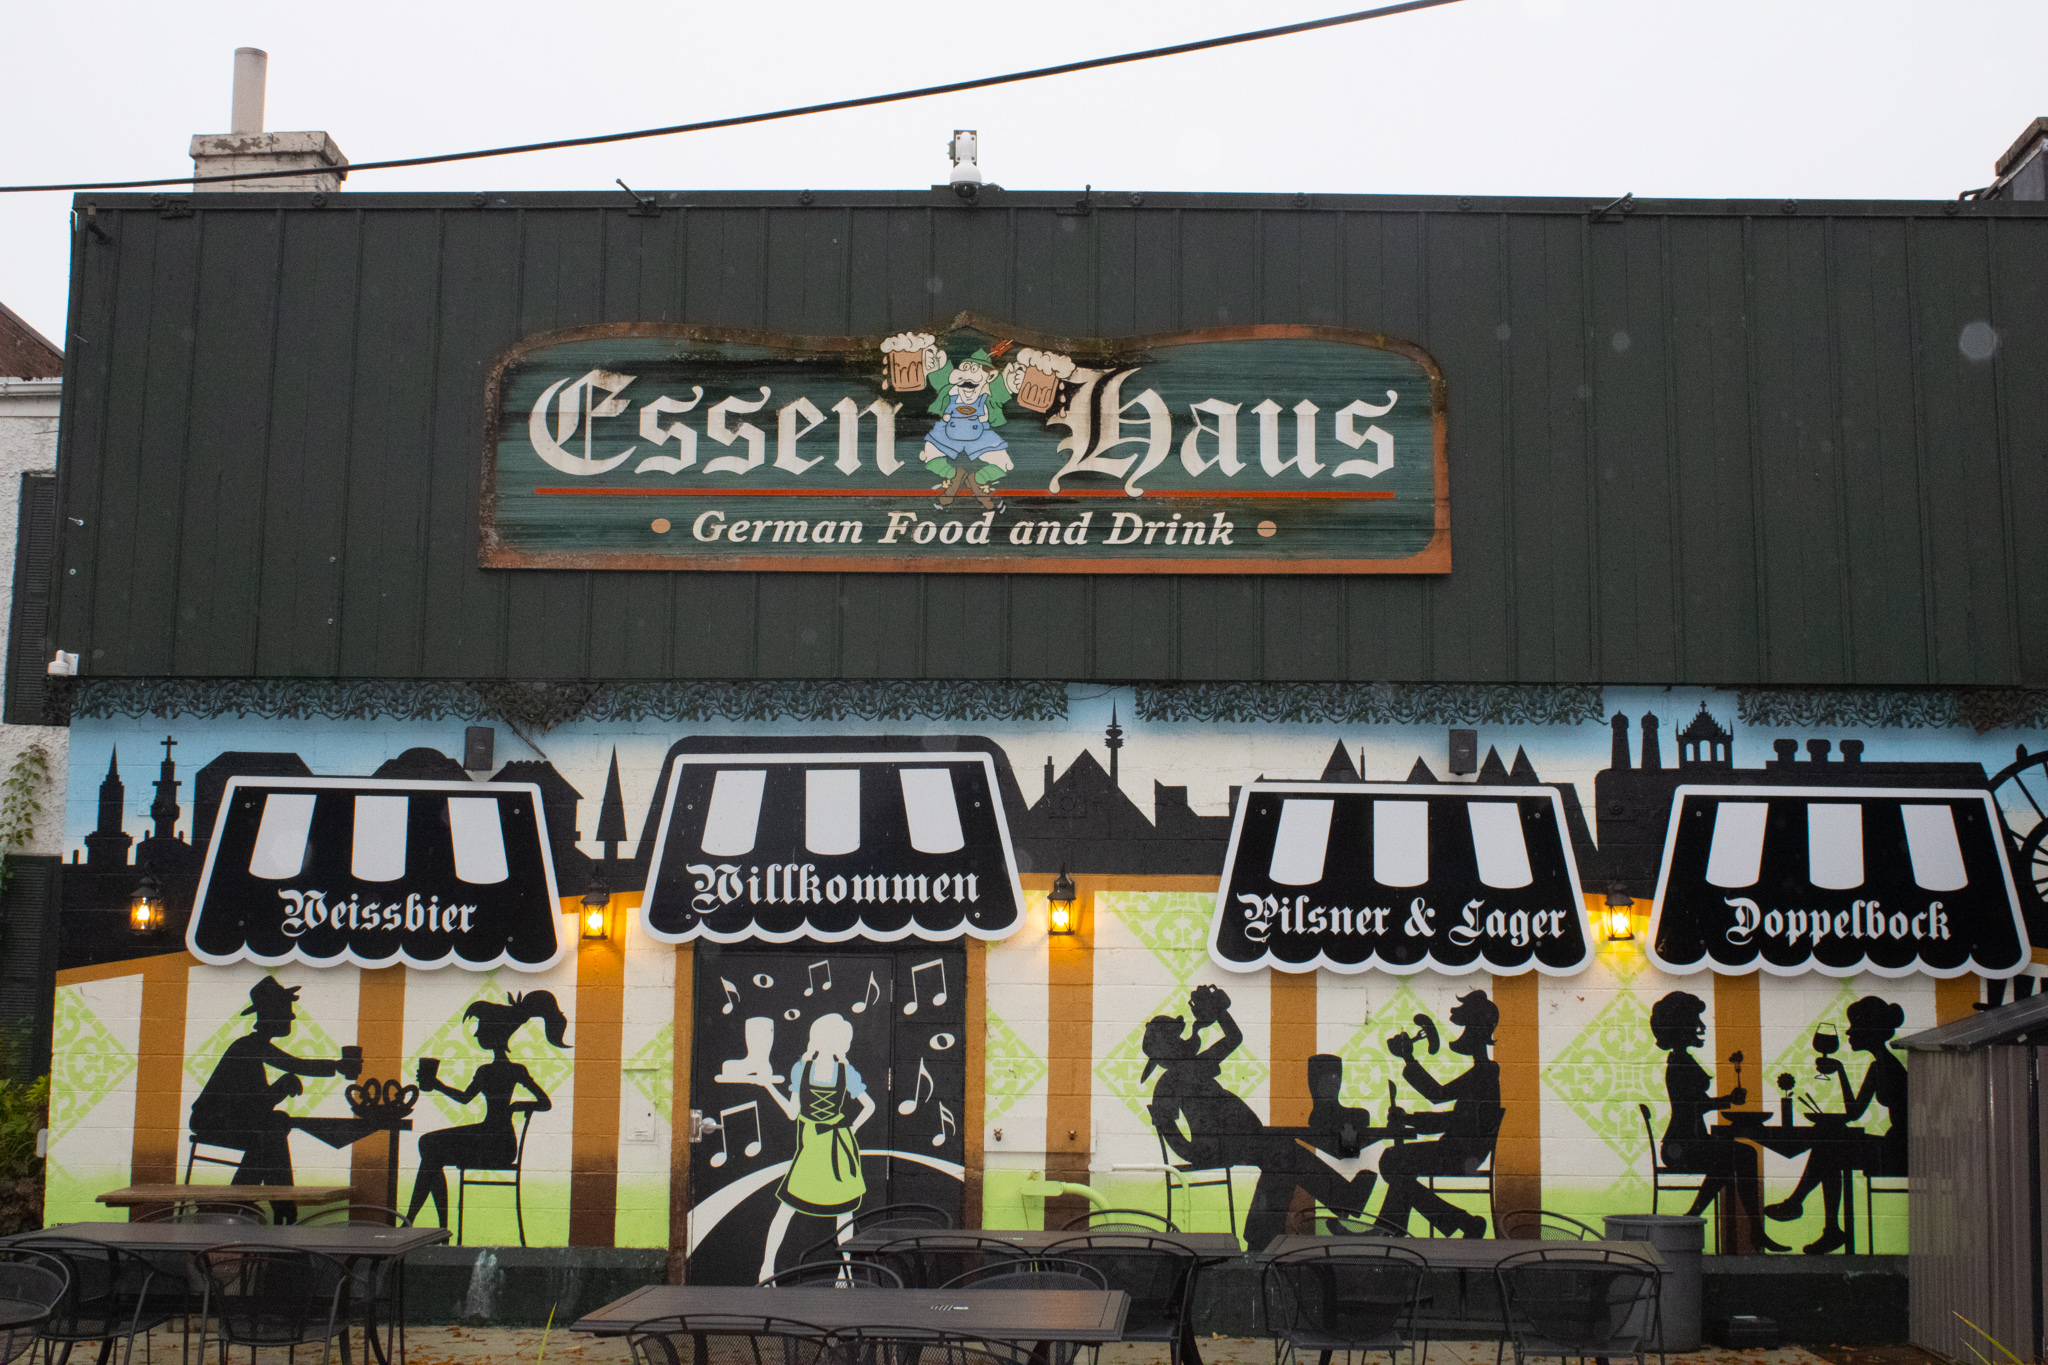 The mural outside of Essen Haus depicts a variety of people drinking, eating and enjoying the atmosphere of the establishment.